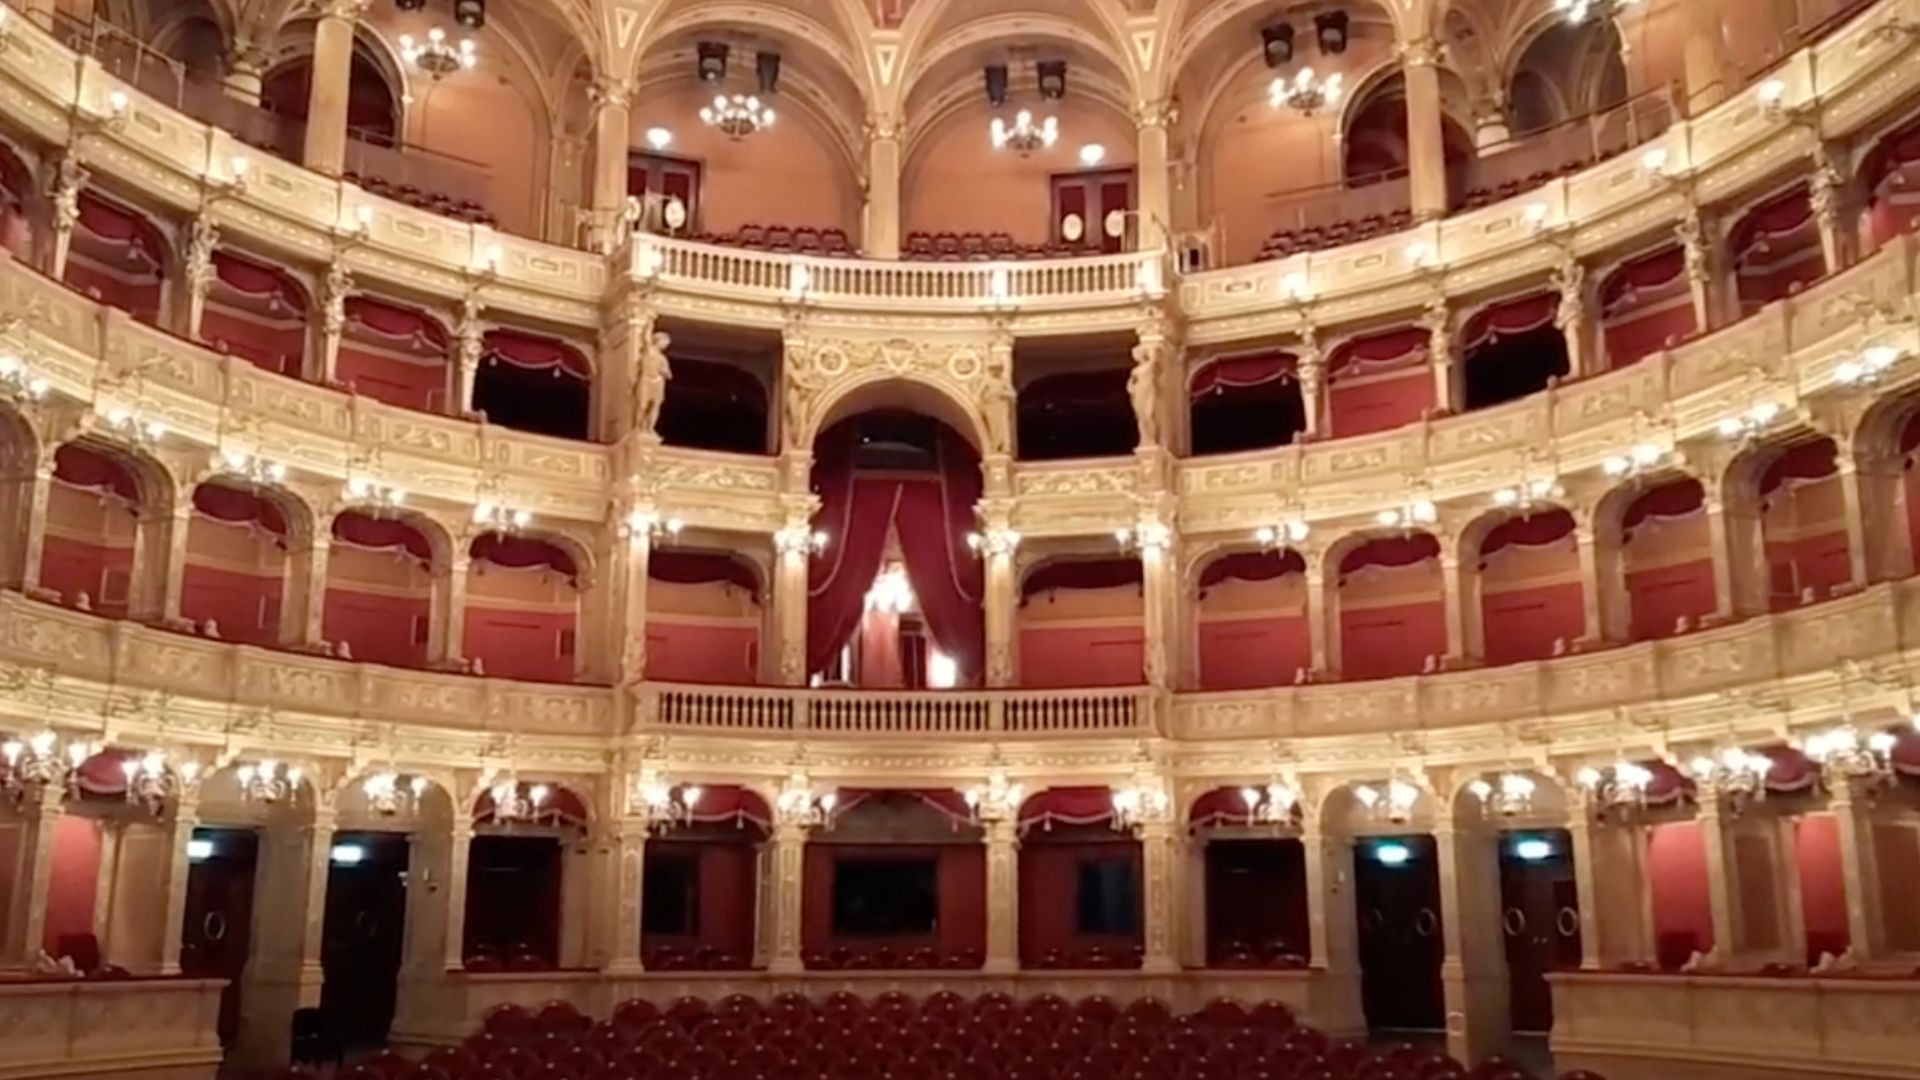 The auditorium of the Hungarian State Opera House in Budapest, Hungary, showing the ornate balconies and seating area.